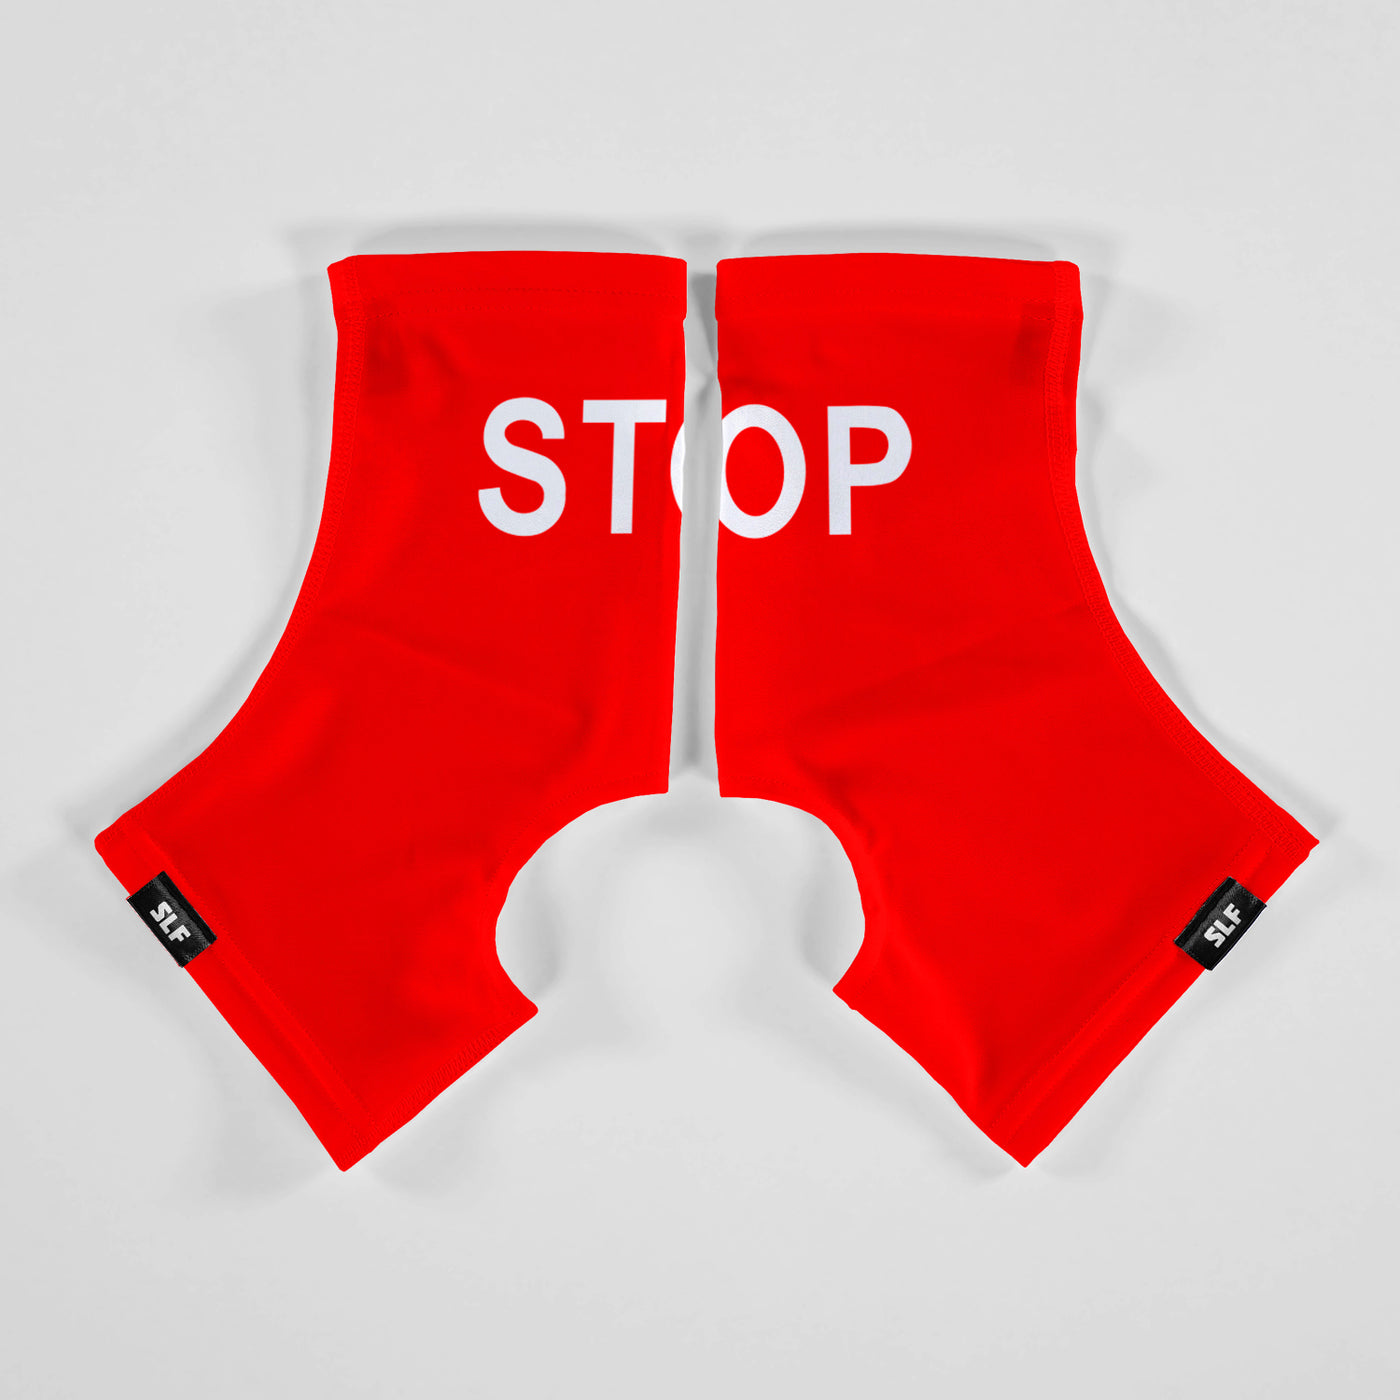 STOP Spats / Cleat Covers